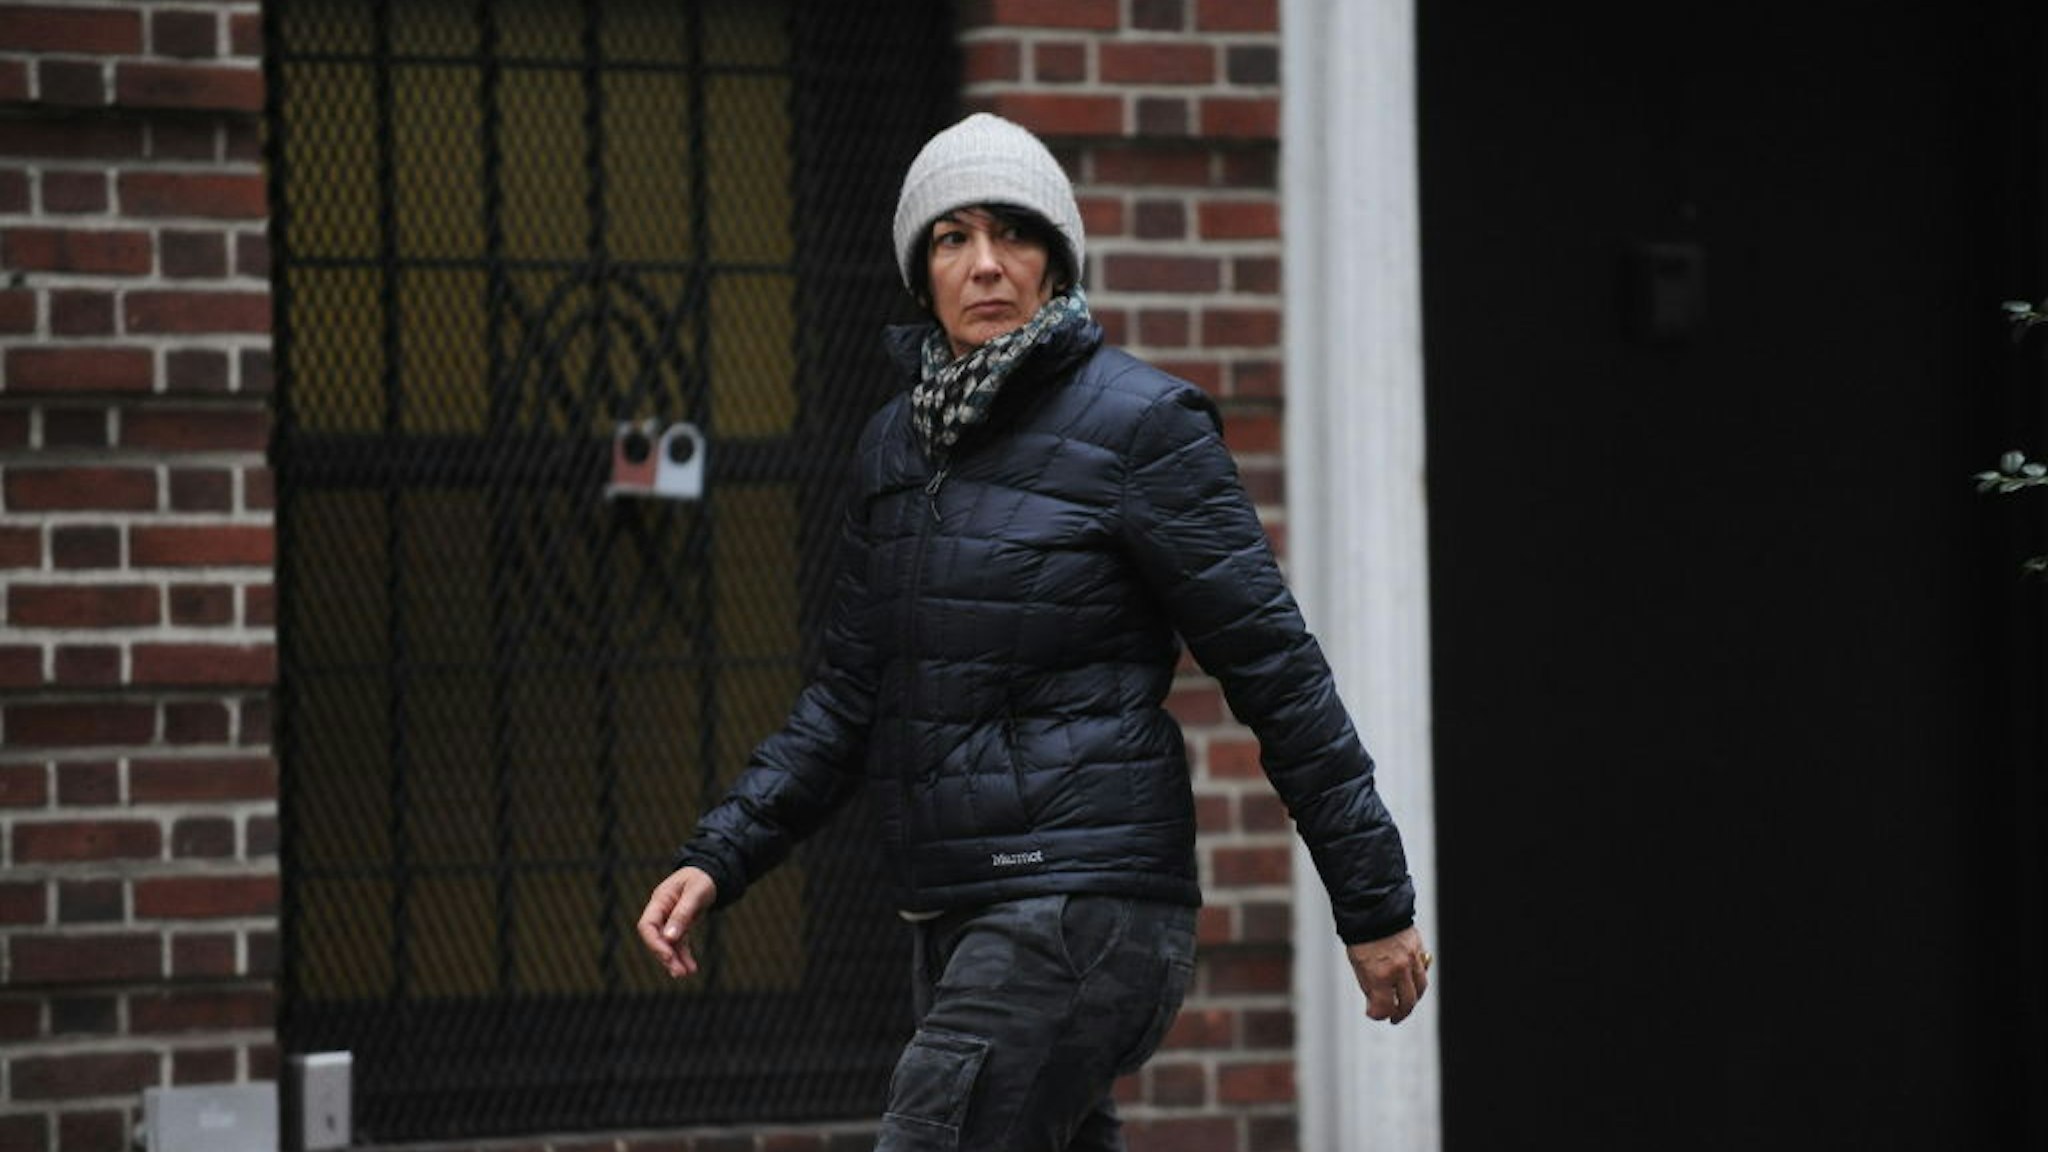 UNITED STATES -January 4: Ghislaine Maxwell, after walking out the side door of her East 65th Street townhouse in Manhattan on Sunday, January 4, 2015. (Photo by Andrew Savulich/NY Daily News Archive via Getty Images)